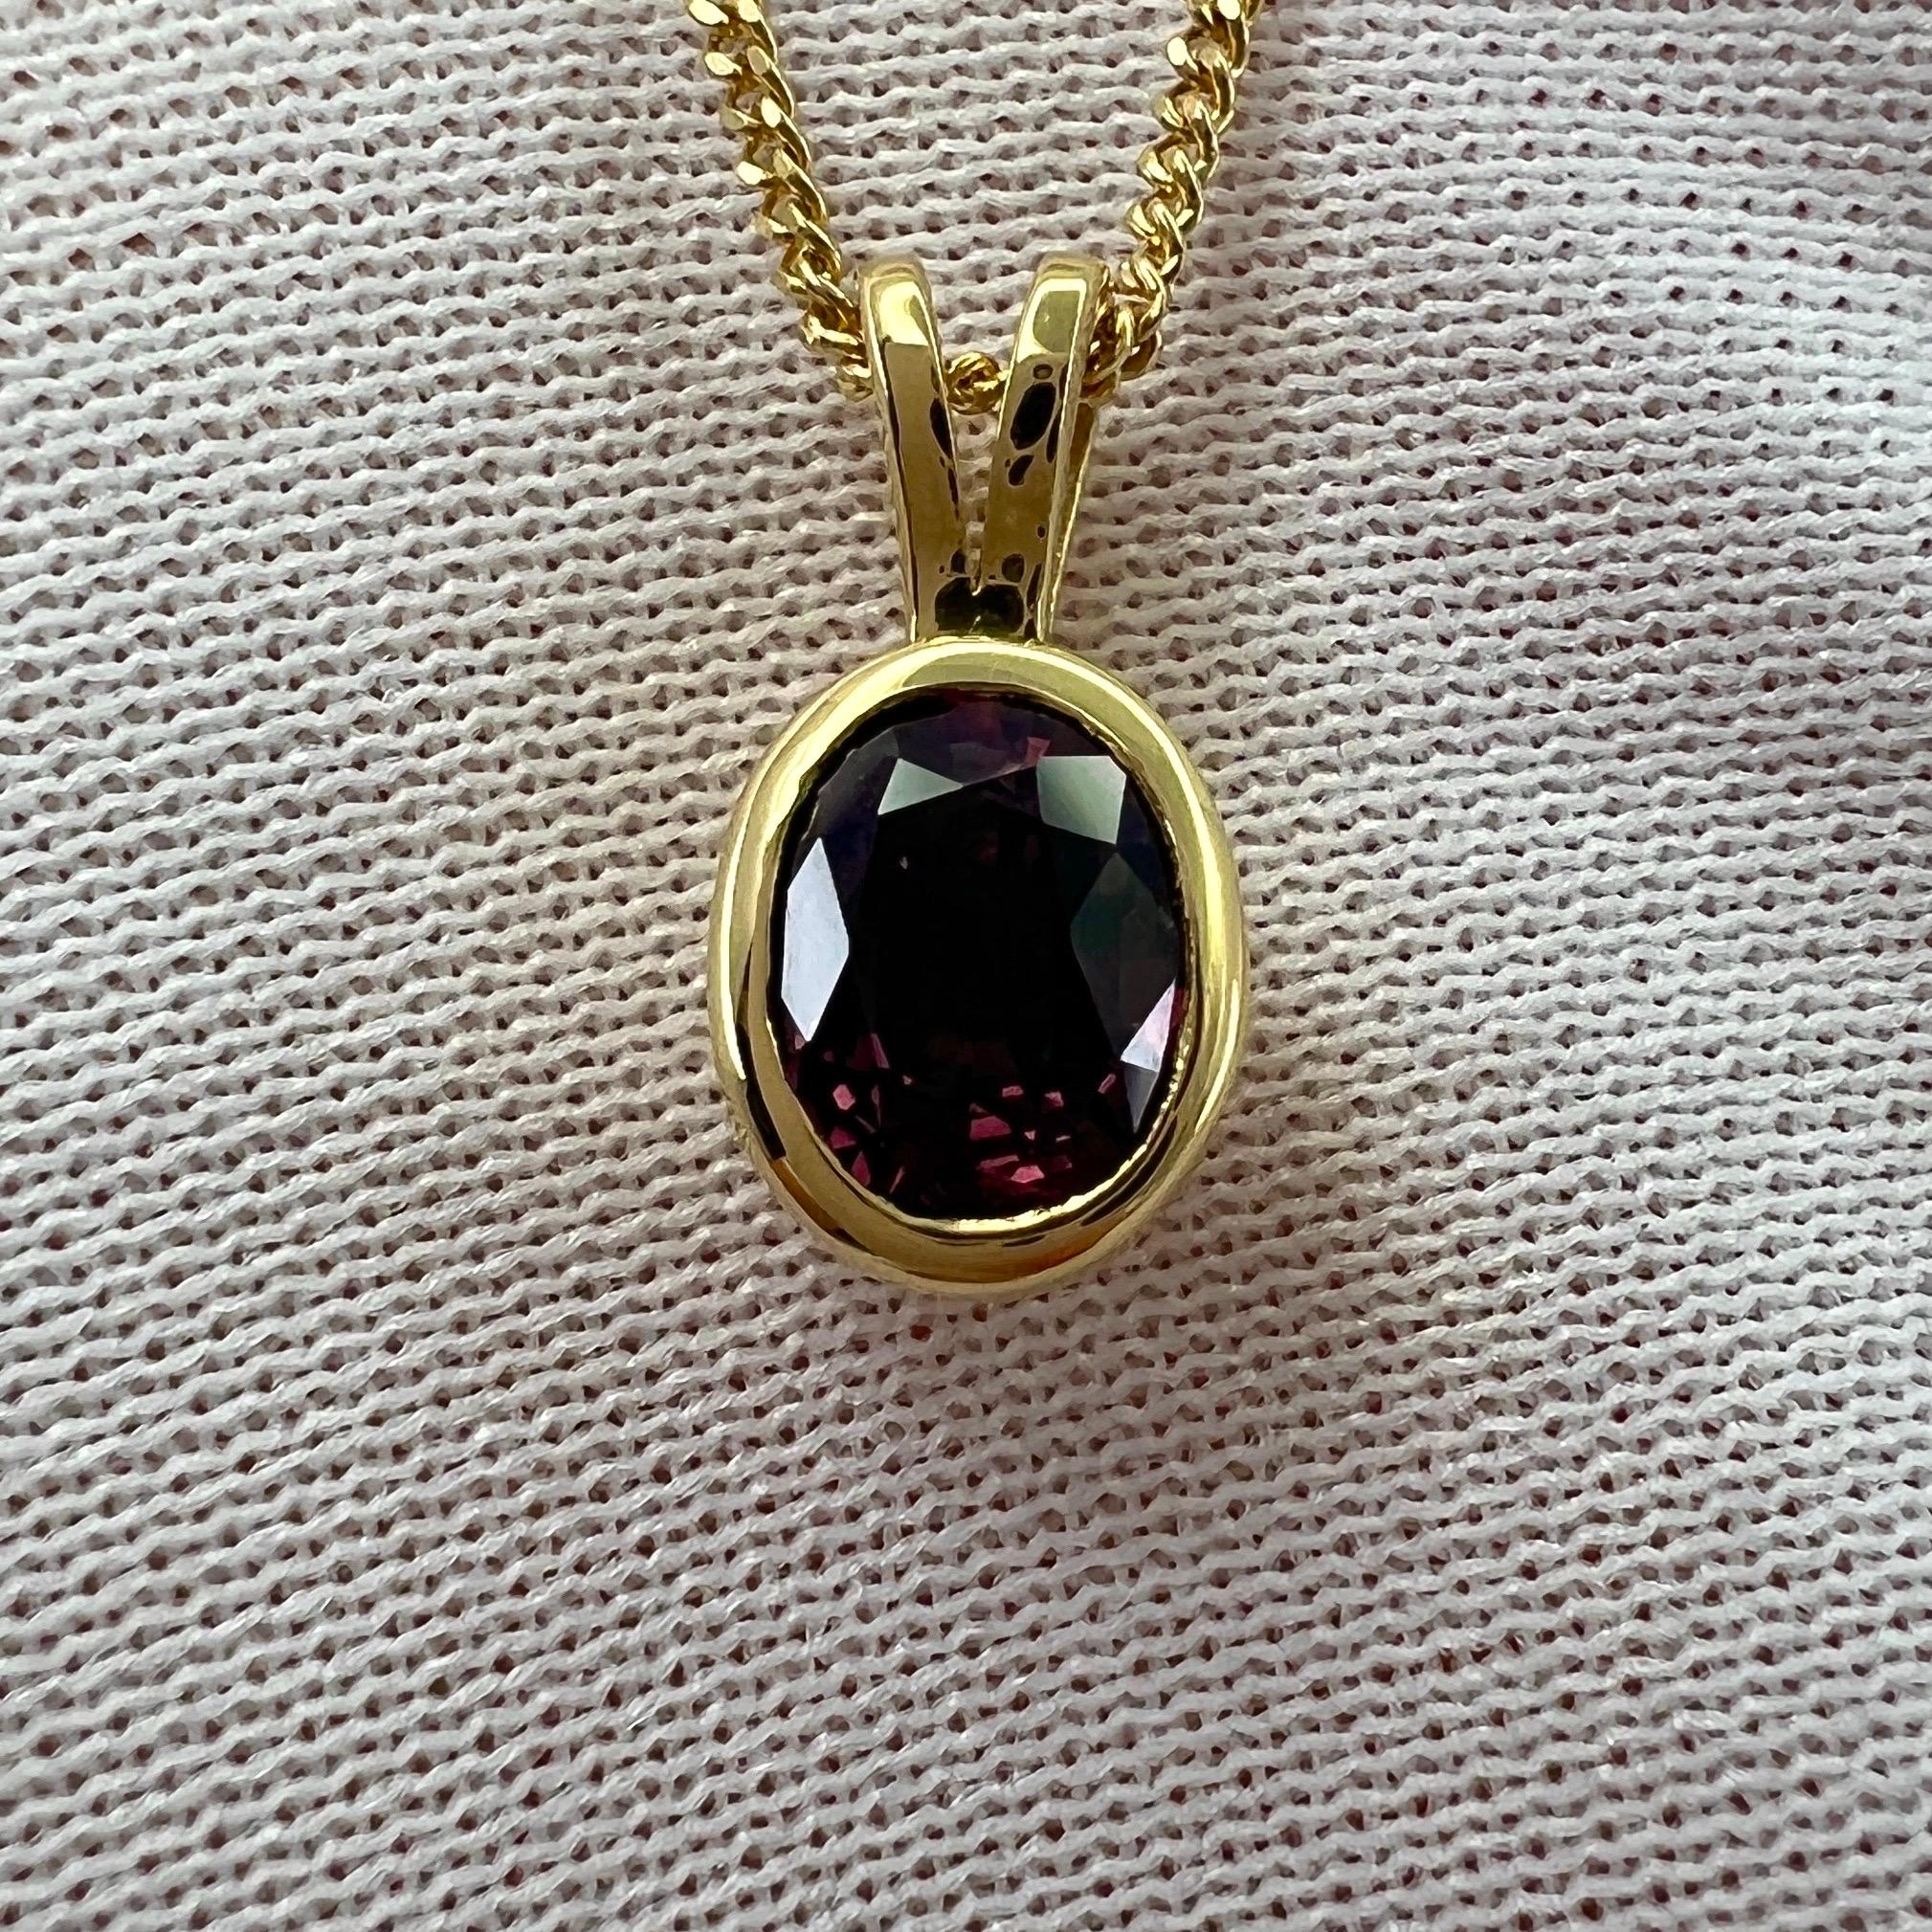 Deep Purple Red Ruby 18 Karat Yellow Gold Solitaire Pendant Necklace.

Stunning 1.20 carat ruby with a beautiful deep purplish red colour and excellent oval cut. Also has good clarity with only some small natural inclusions visible when looking